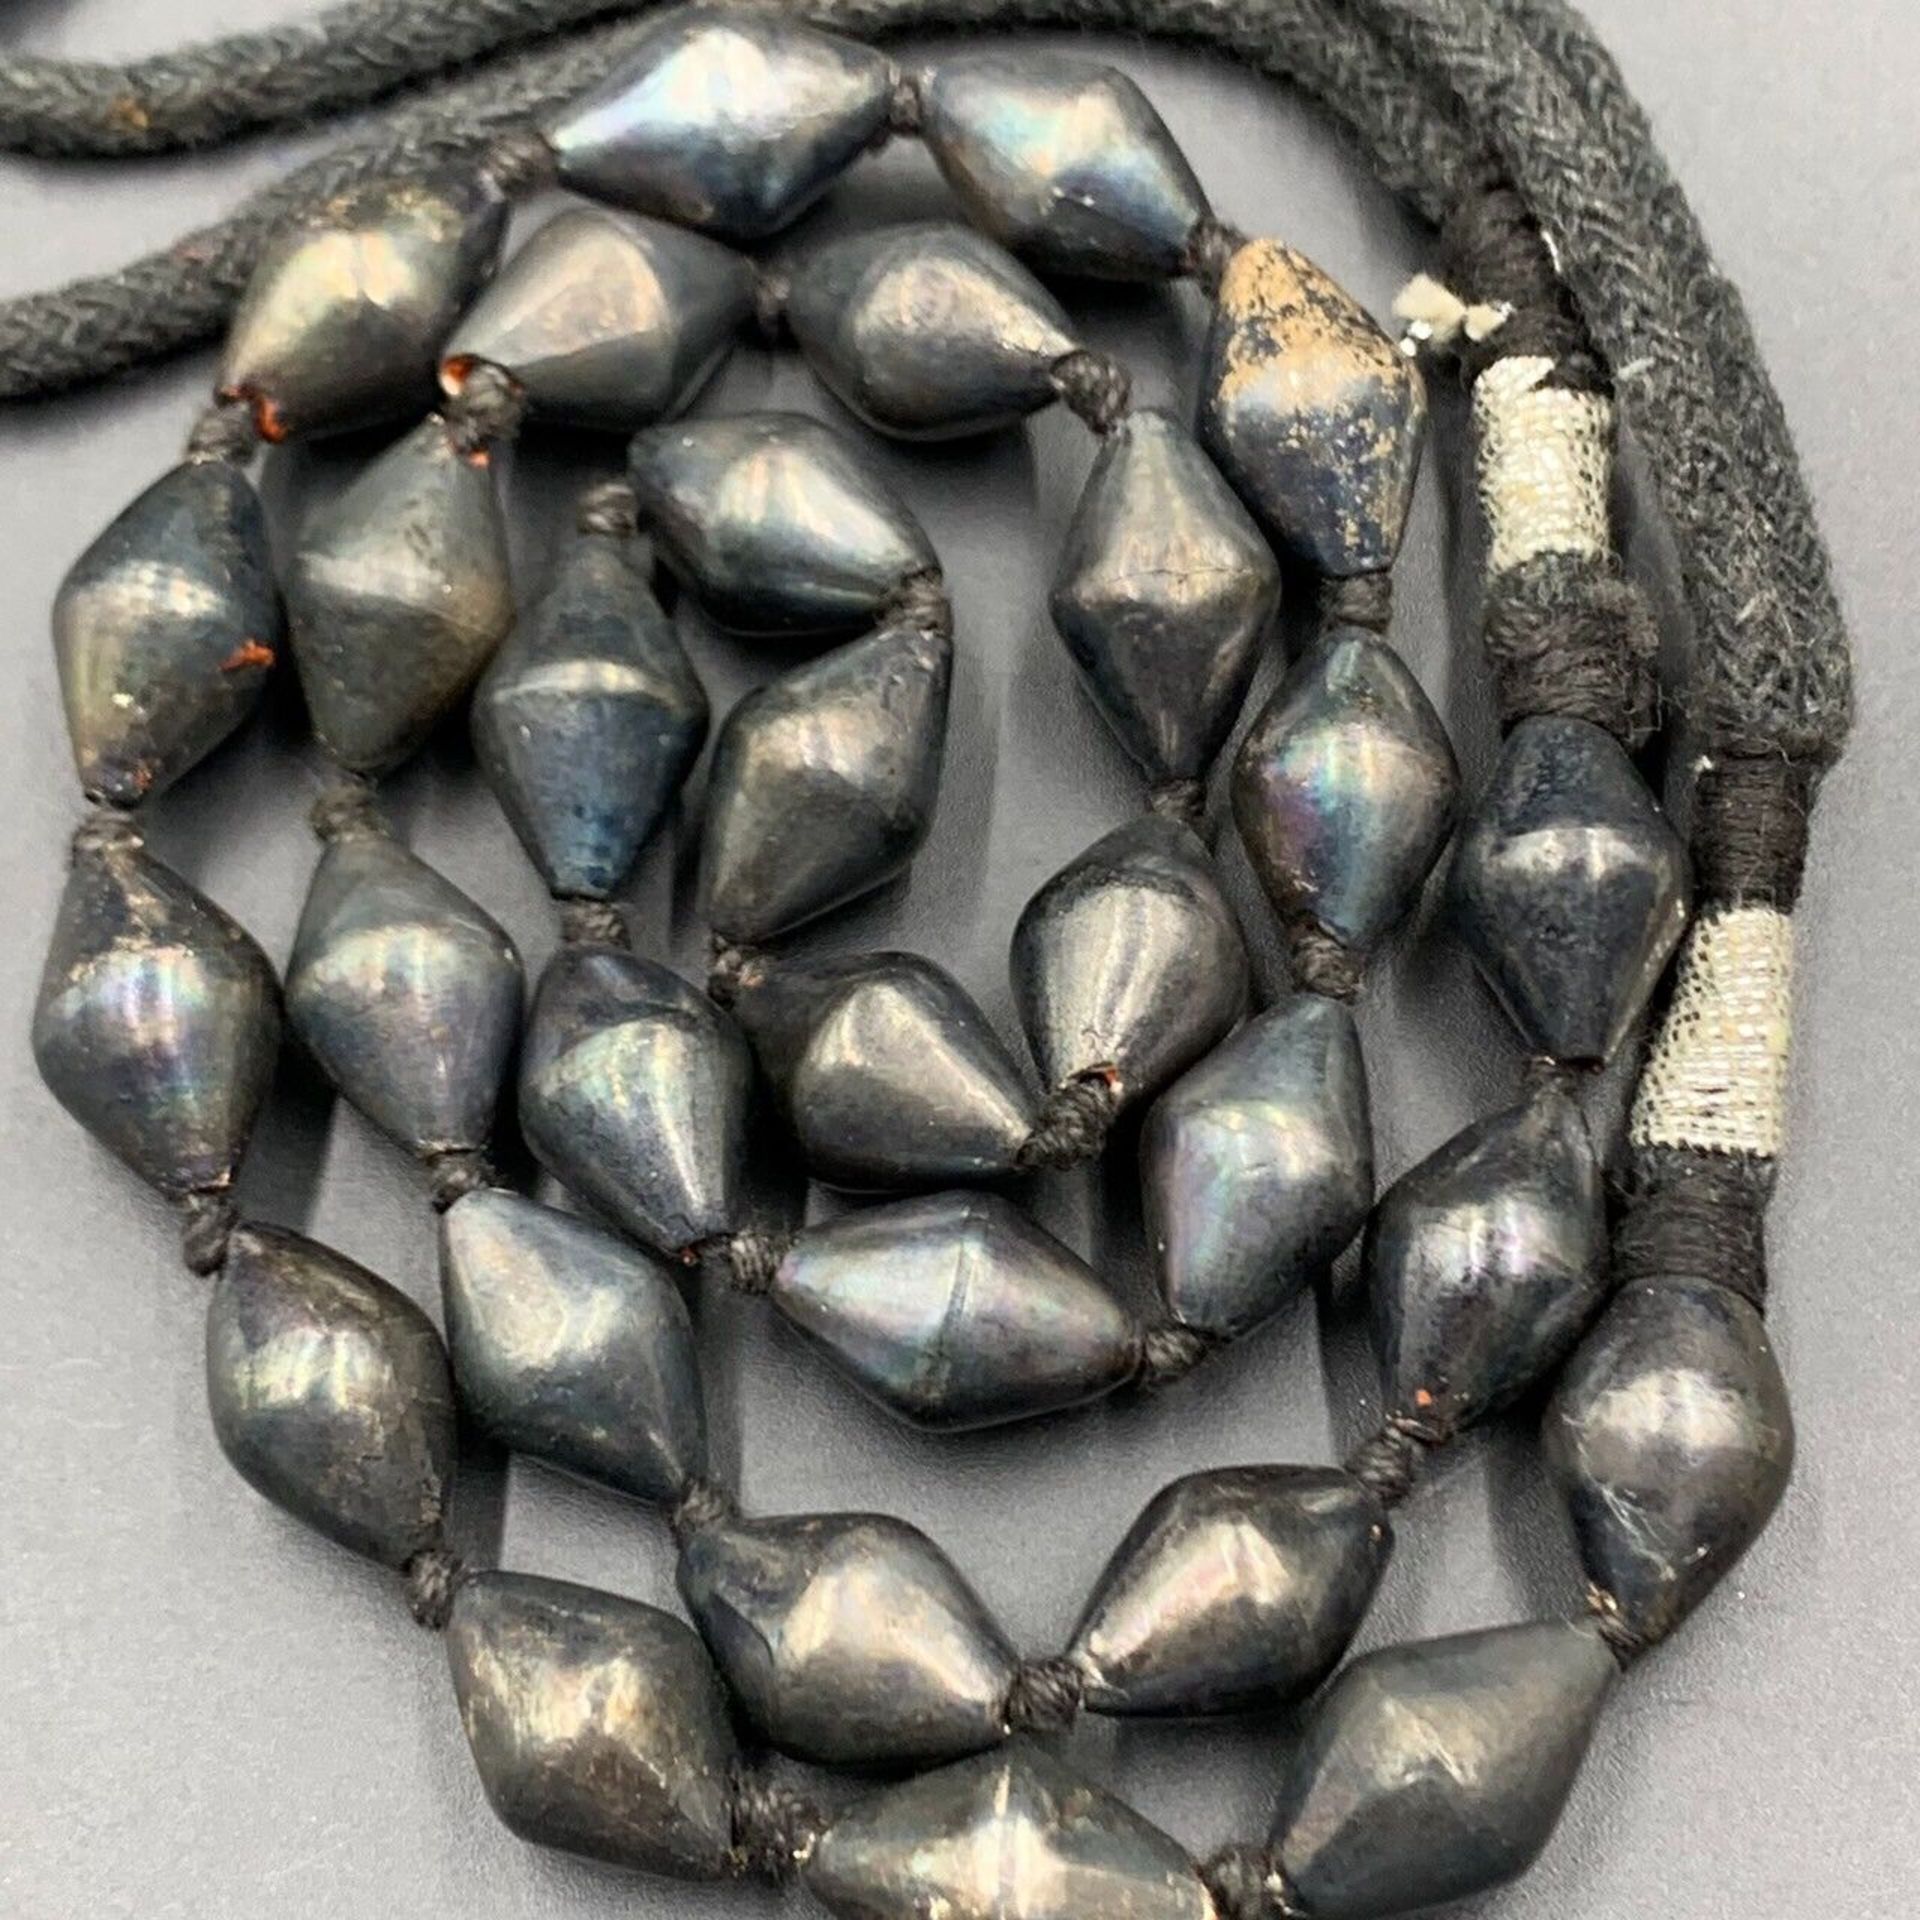 Rare Vintage Old Wax With Silver Coated Layer Beads, Antique Beads - Image 5 of 6